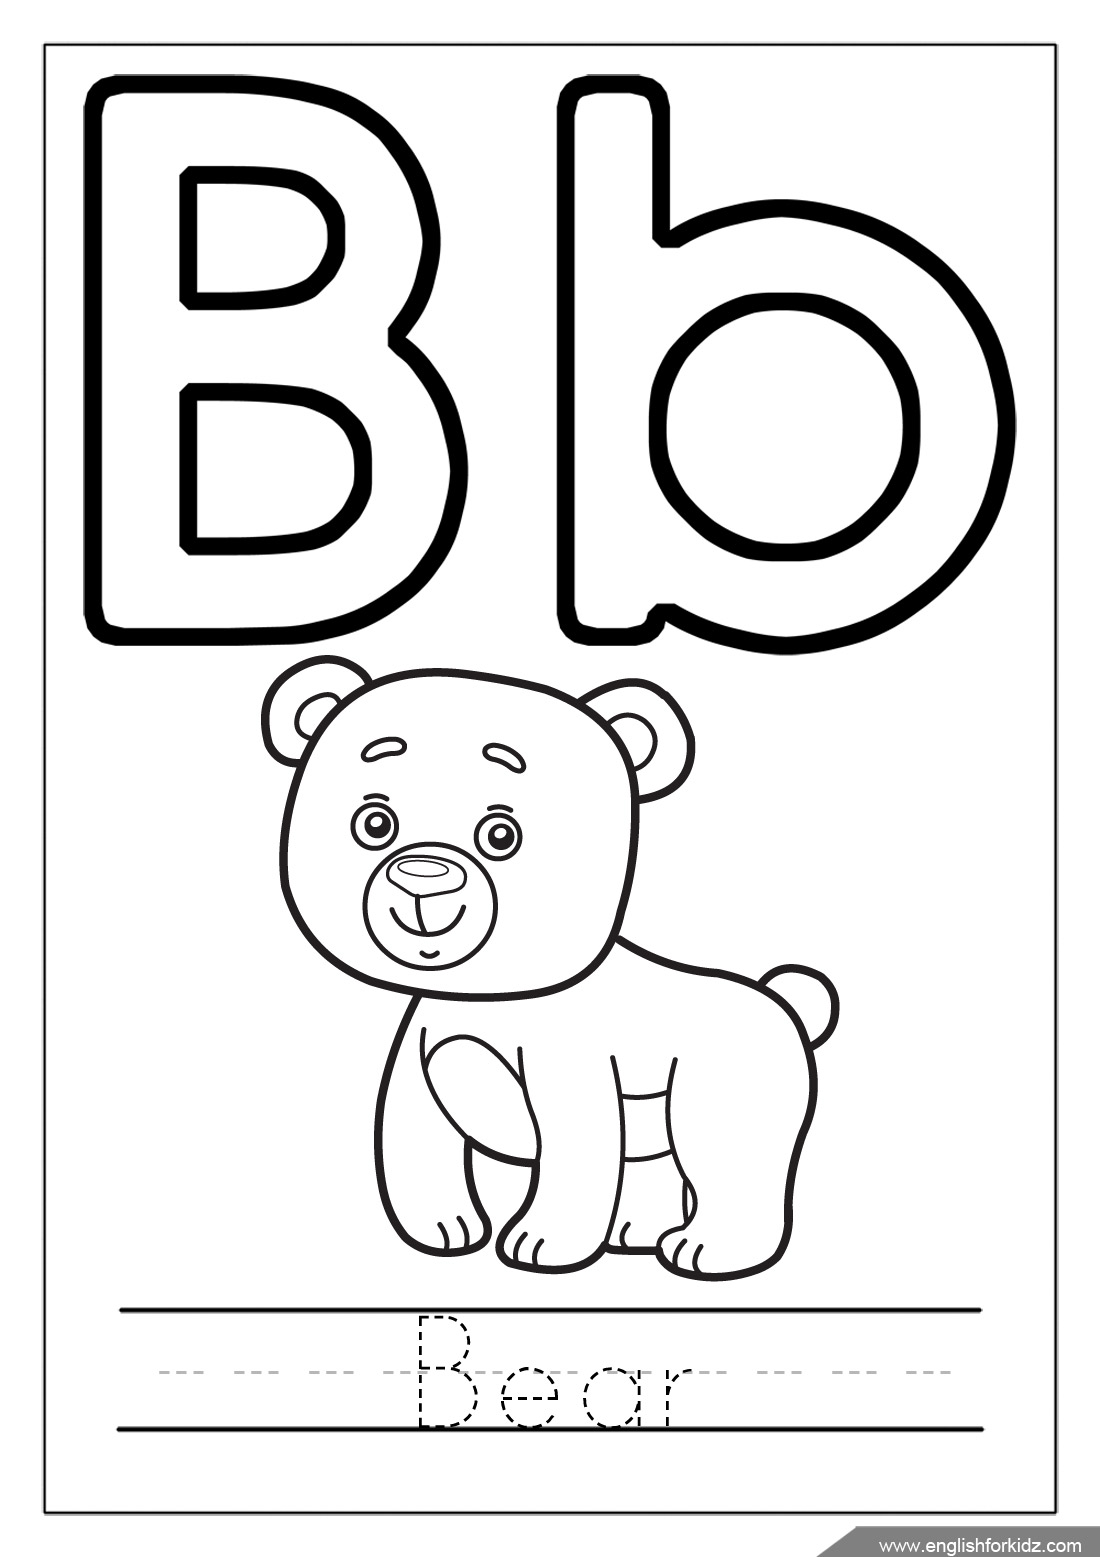 English for kids step by step letter b worksheets flash cards coloring pages